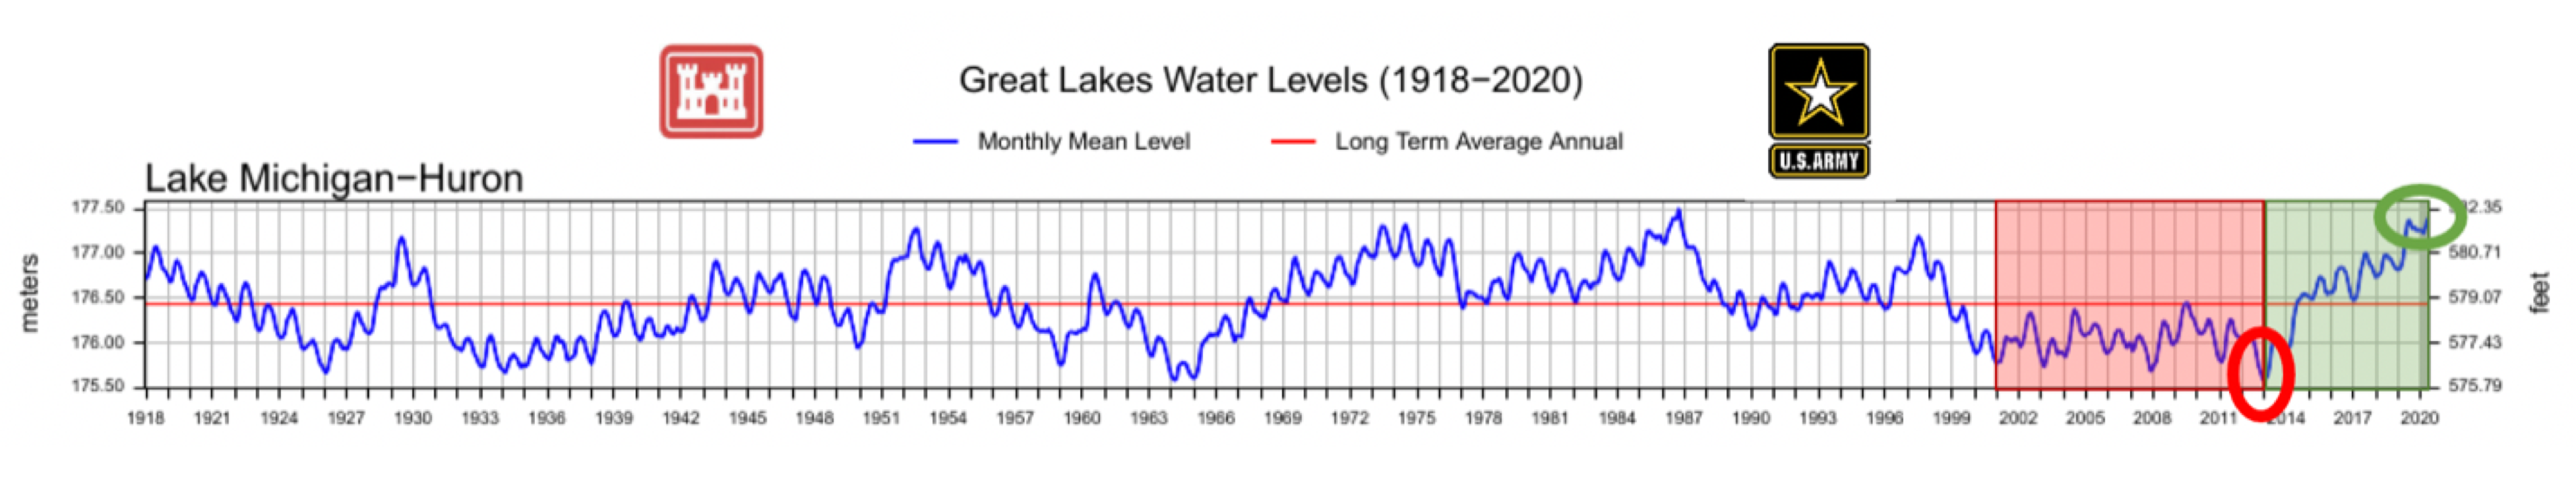 graph showing Lake Michigan-Huron water levels from 1918 to 2020